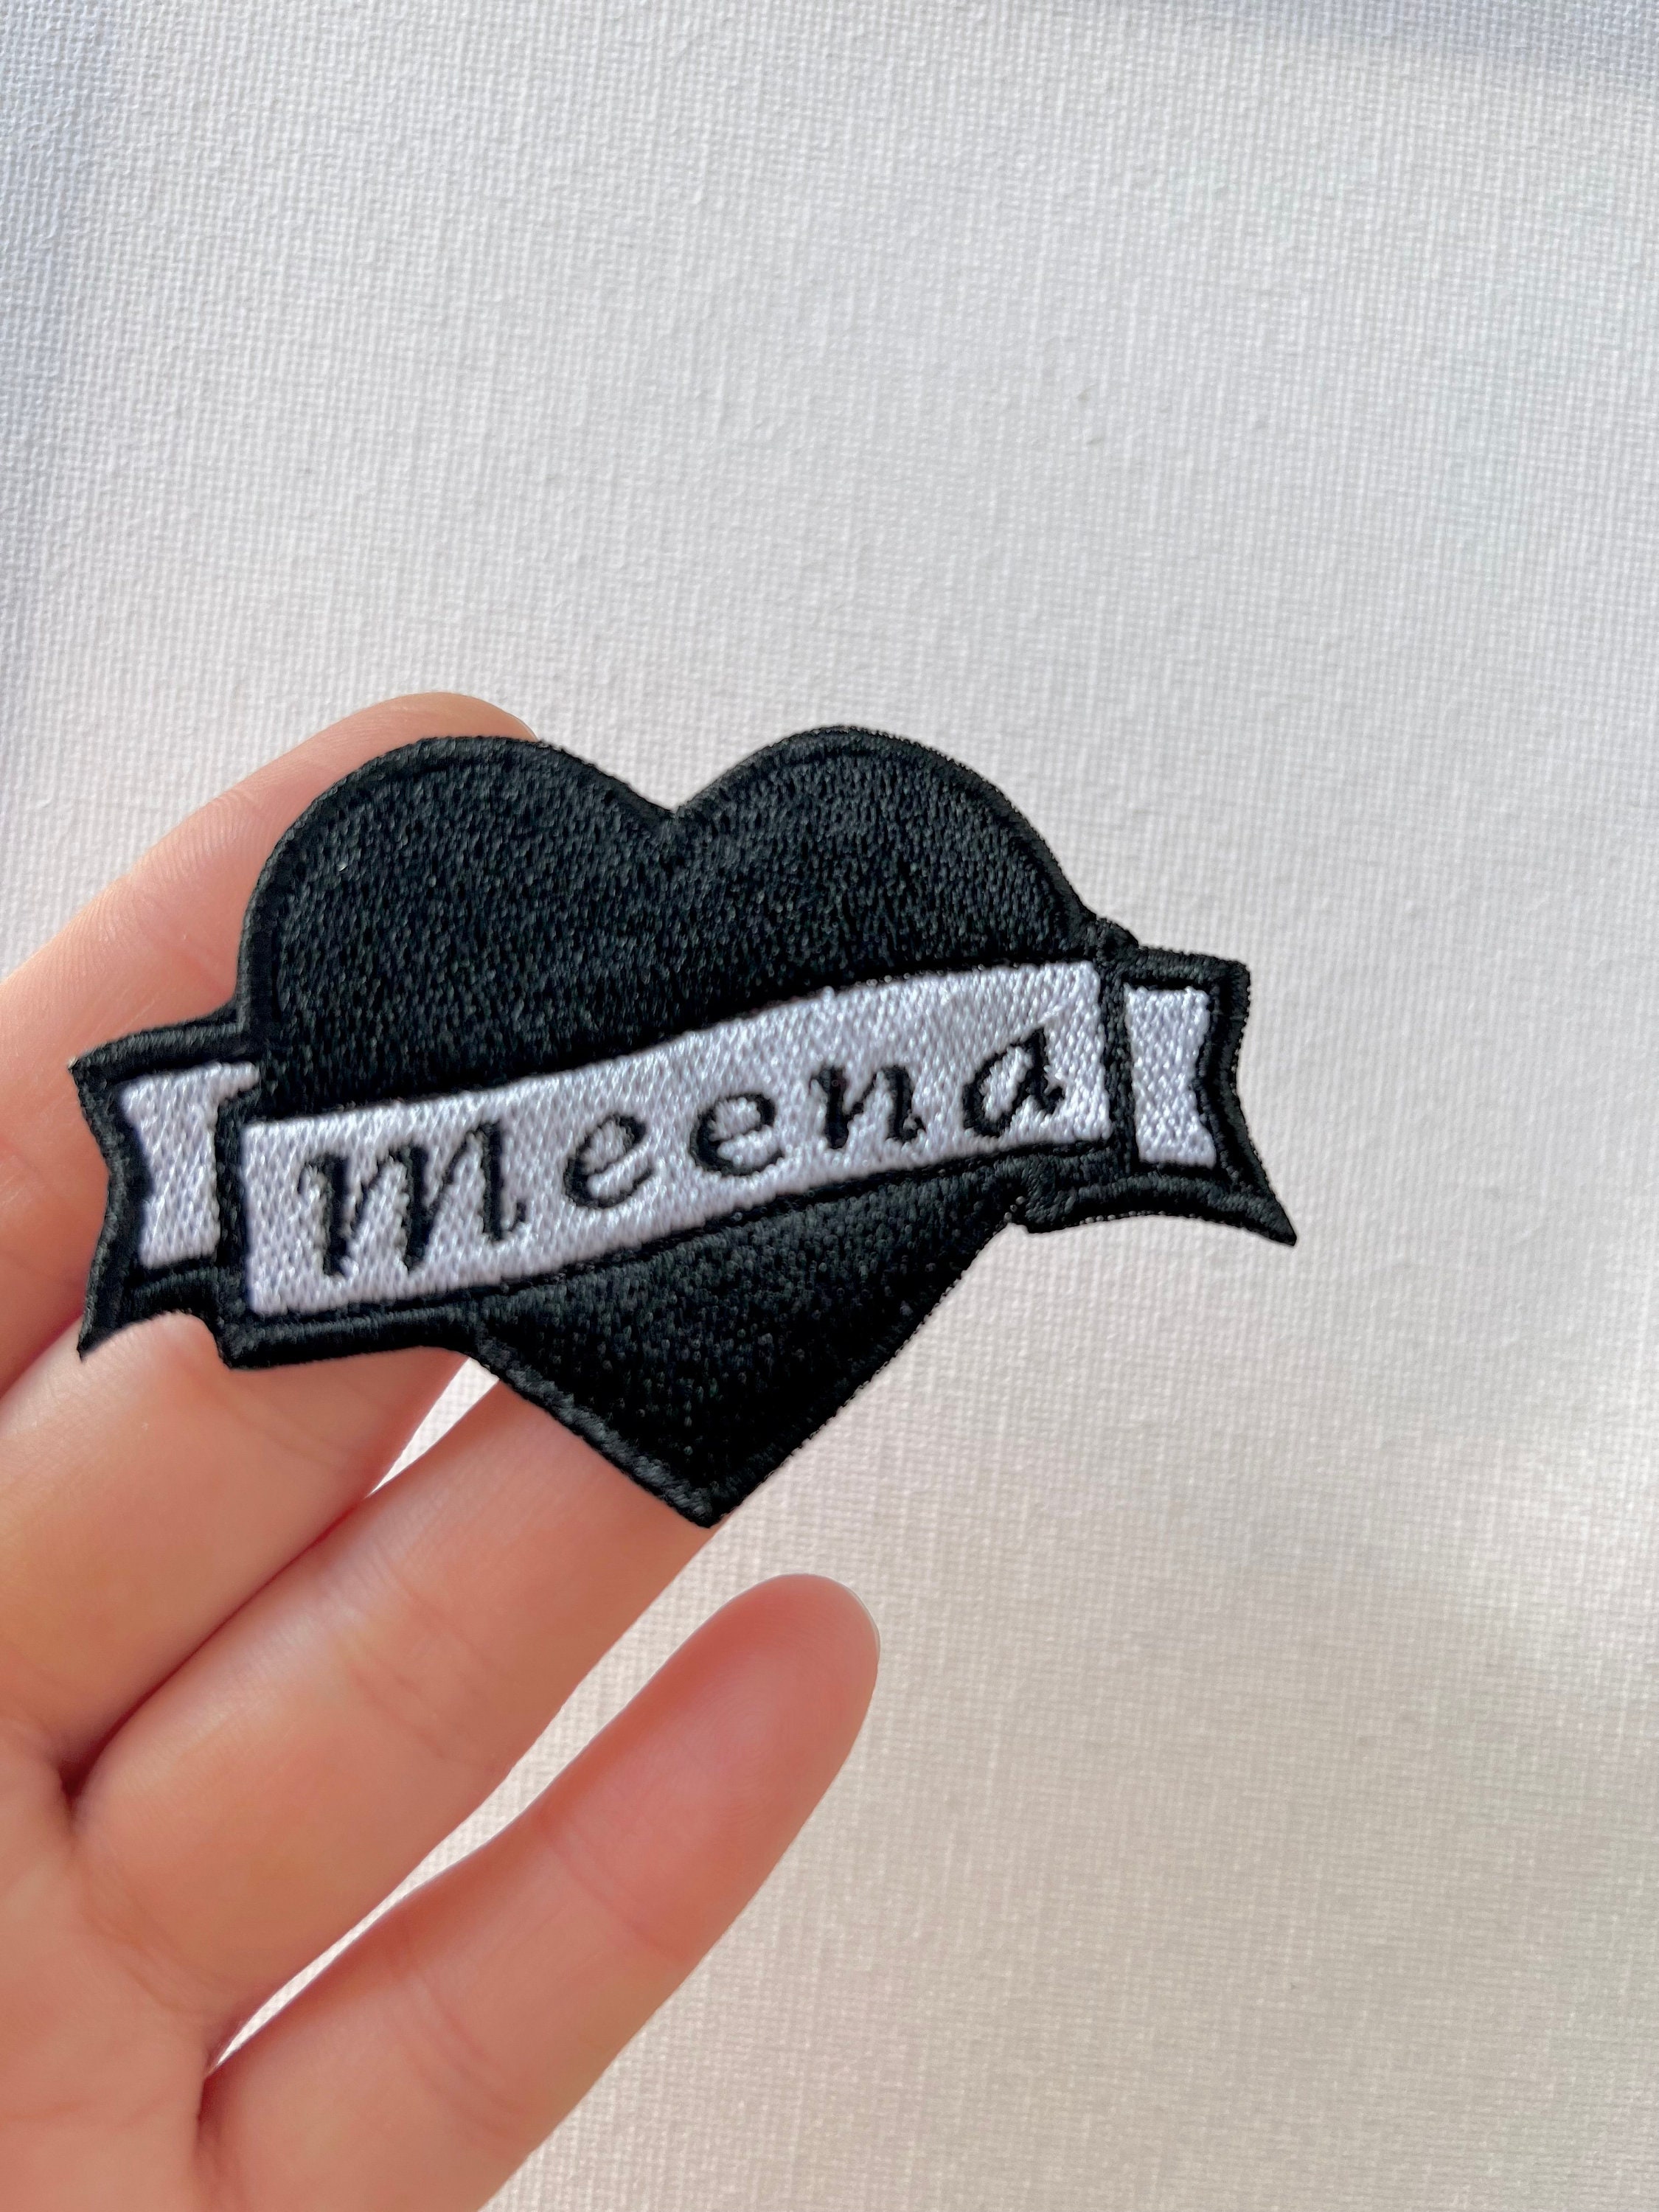 Personalised Heart Banner Embroidered Patches, Iron / Sew on